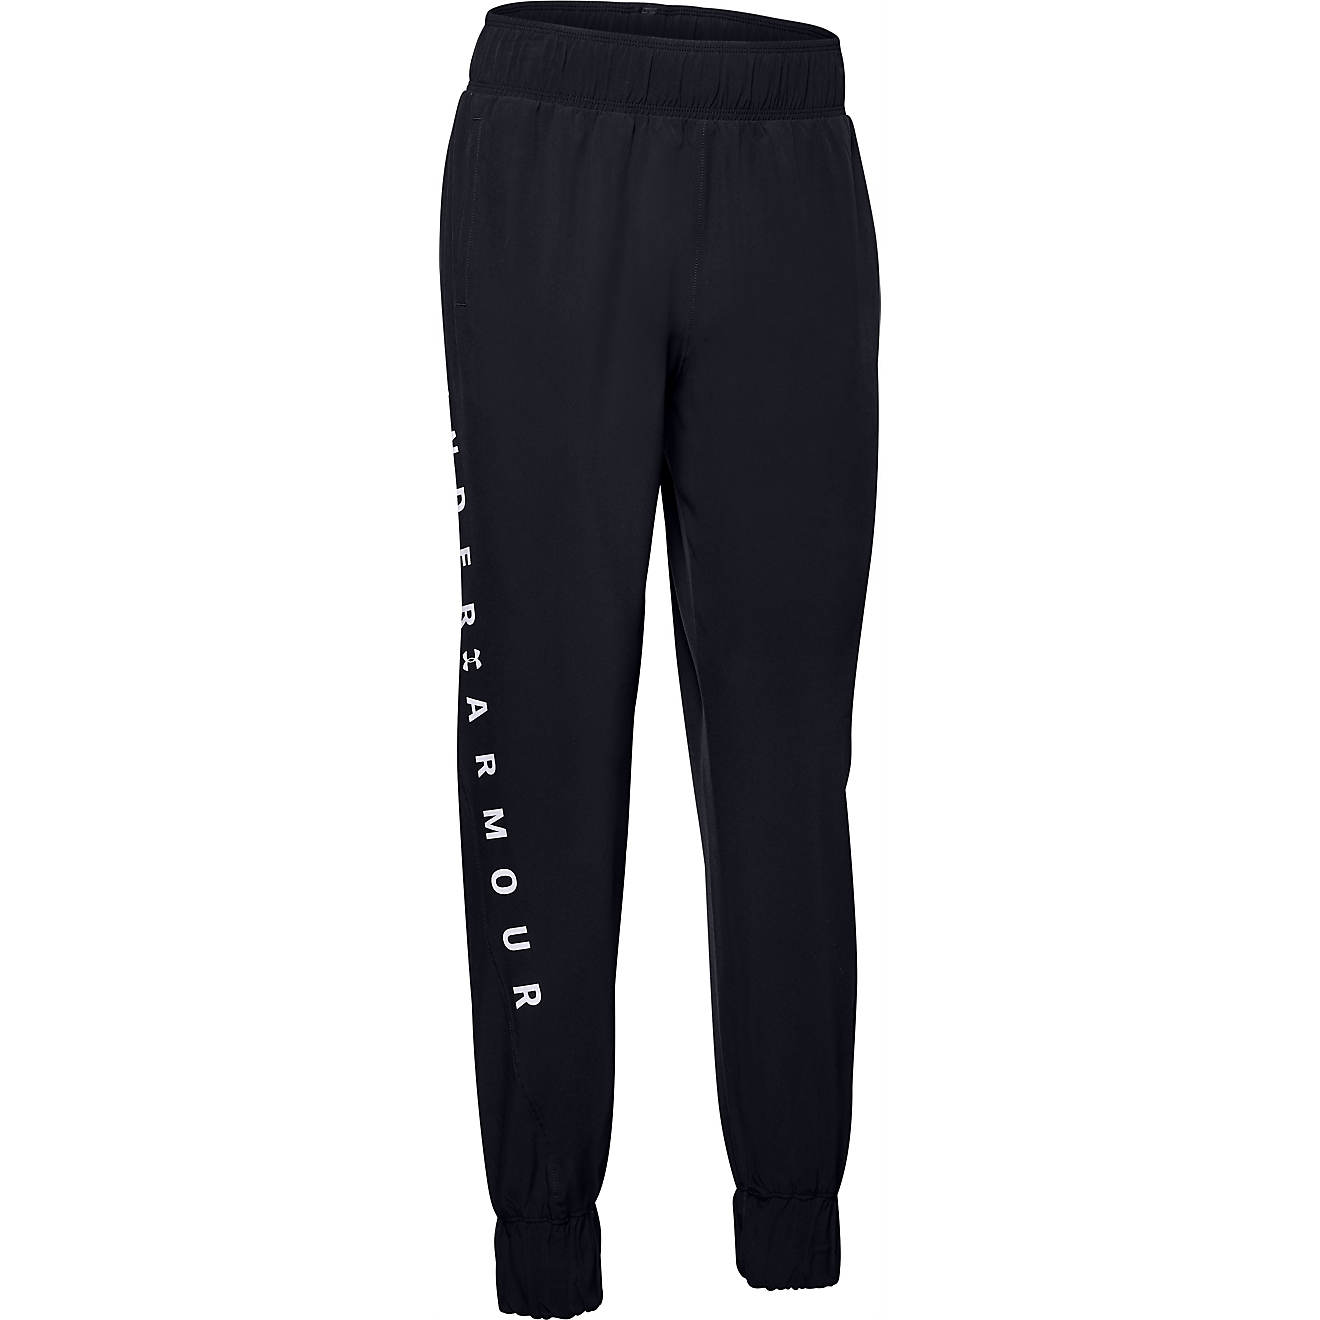 Under Armour Women's Woven Branded Sweatpants | Academy